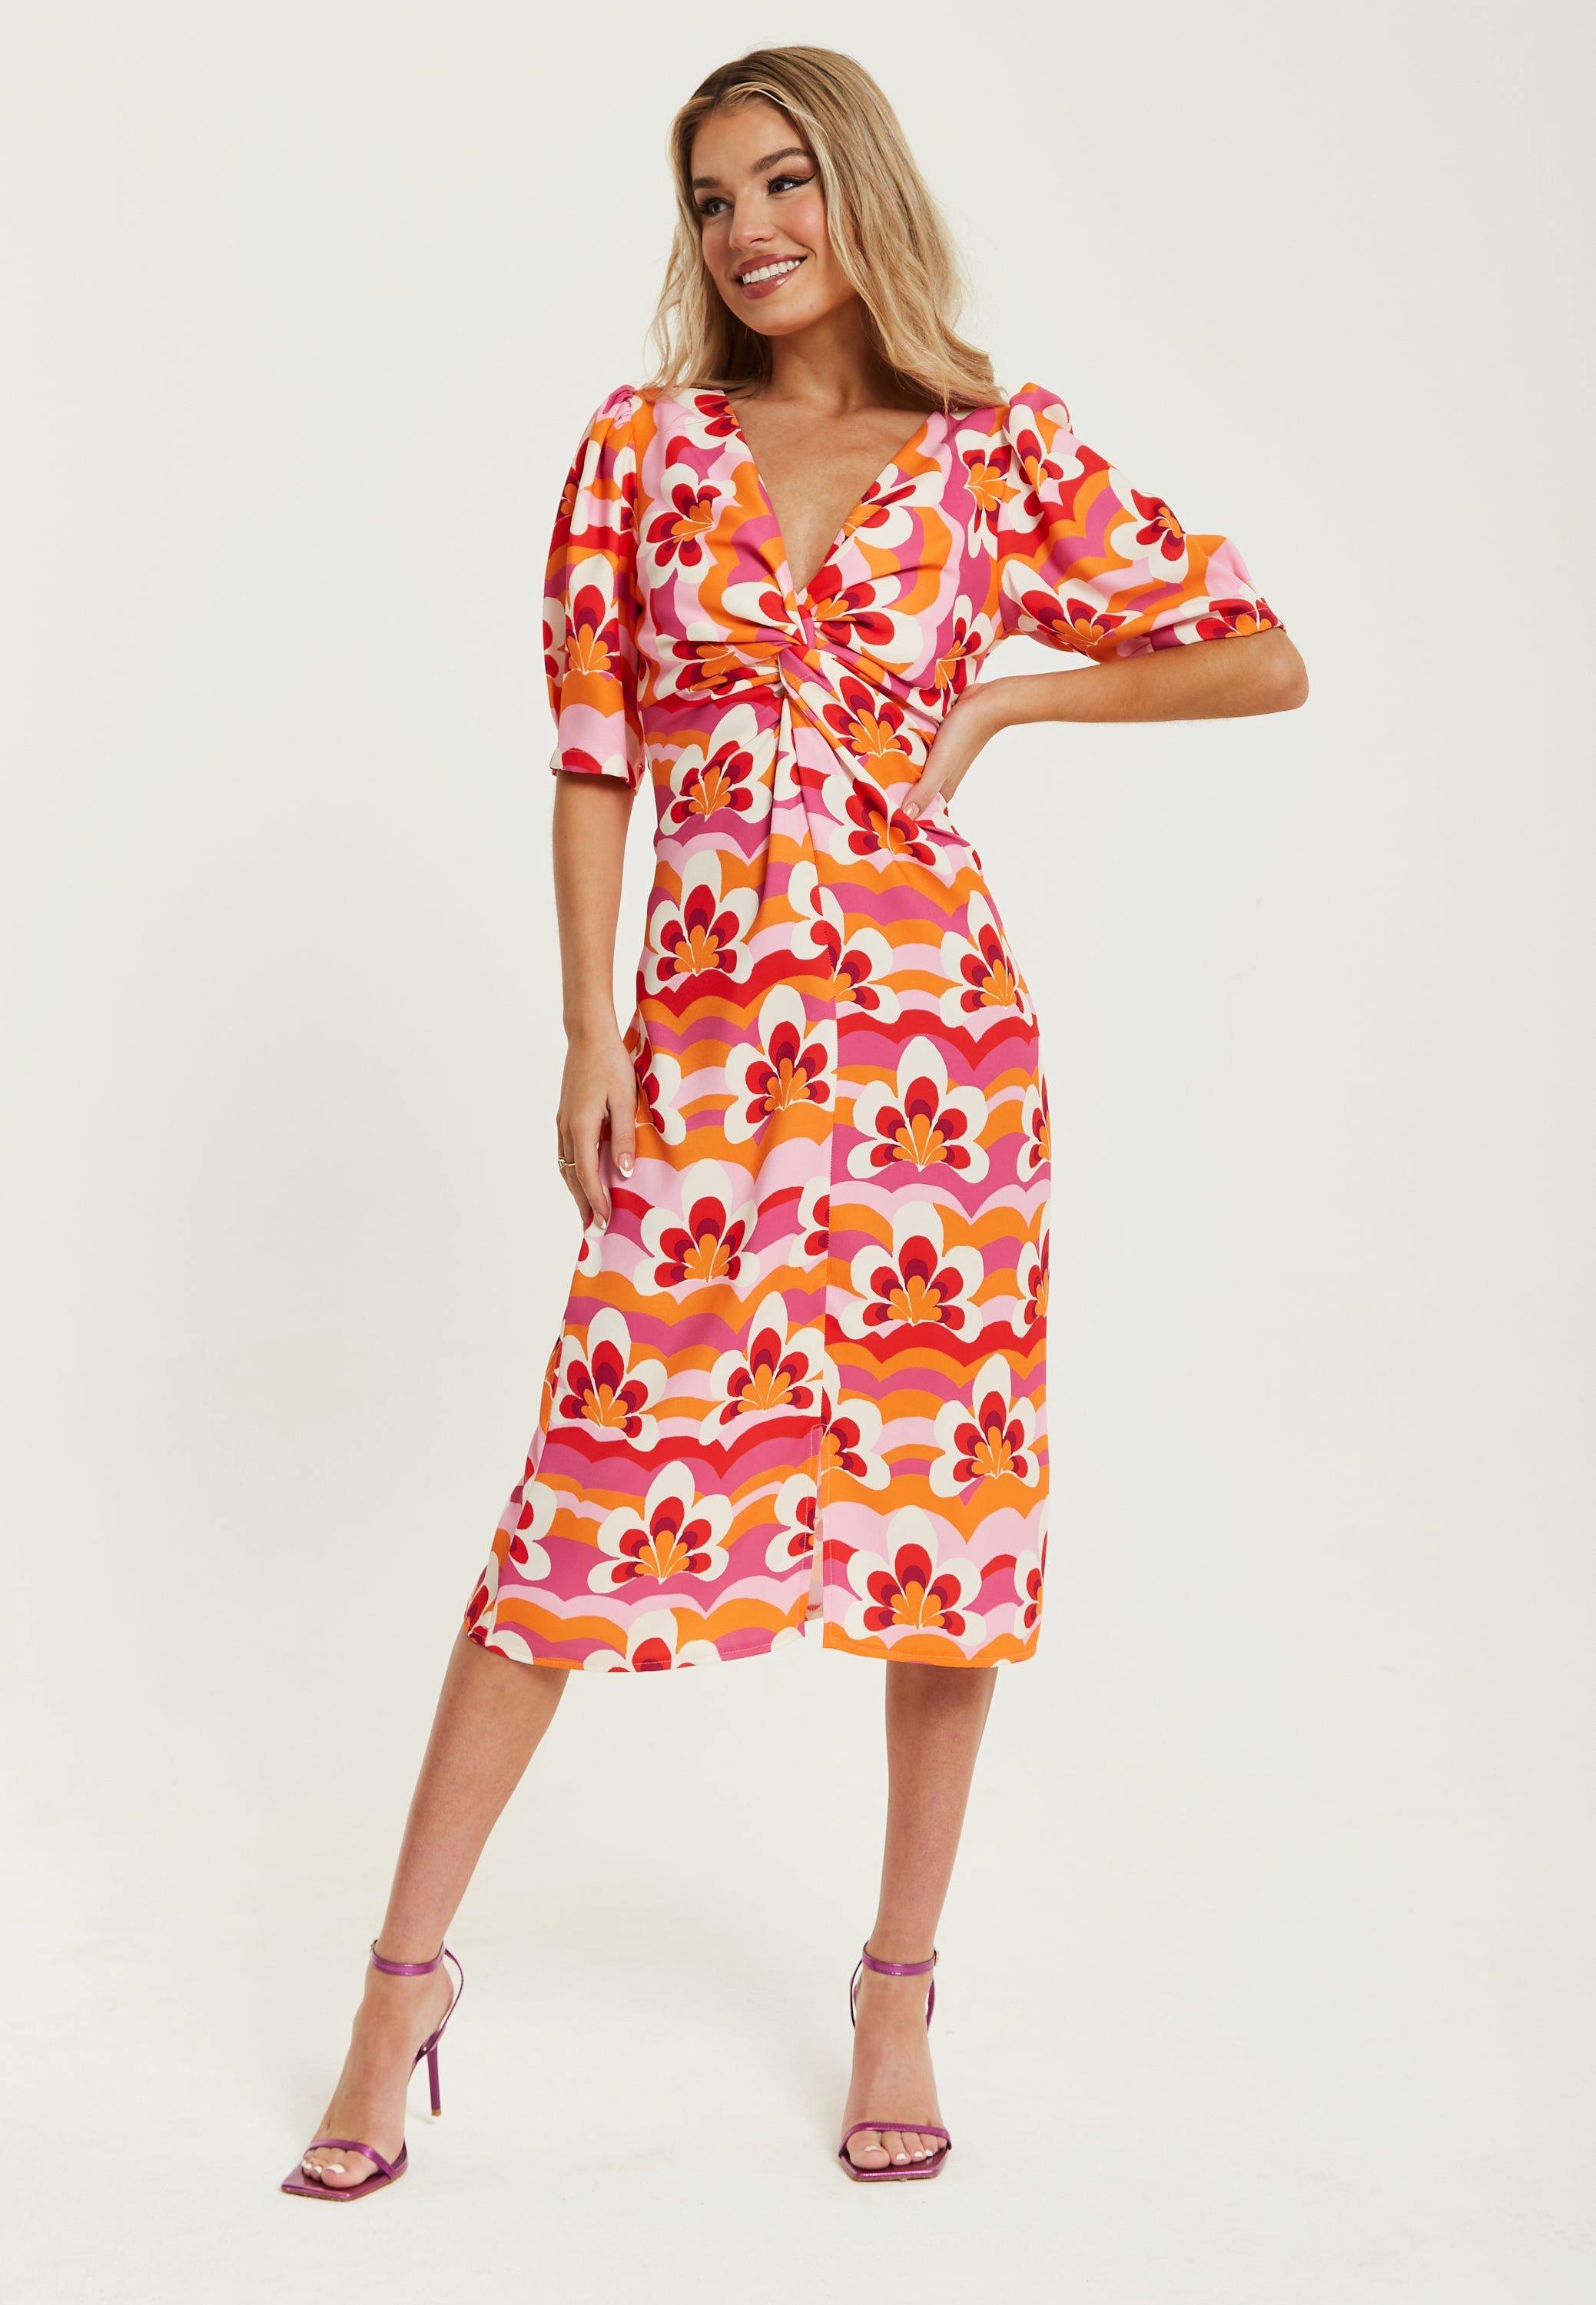 Floral Knot Front Midi Dress in Orange and Pink